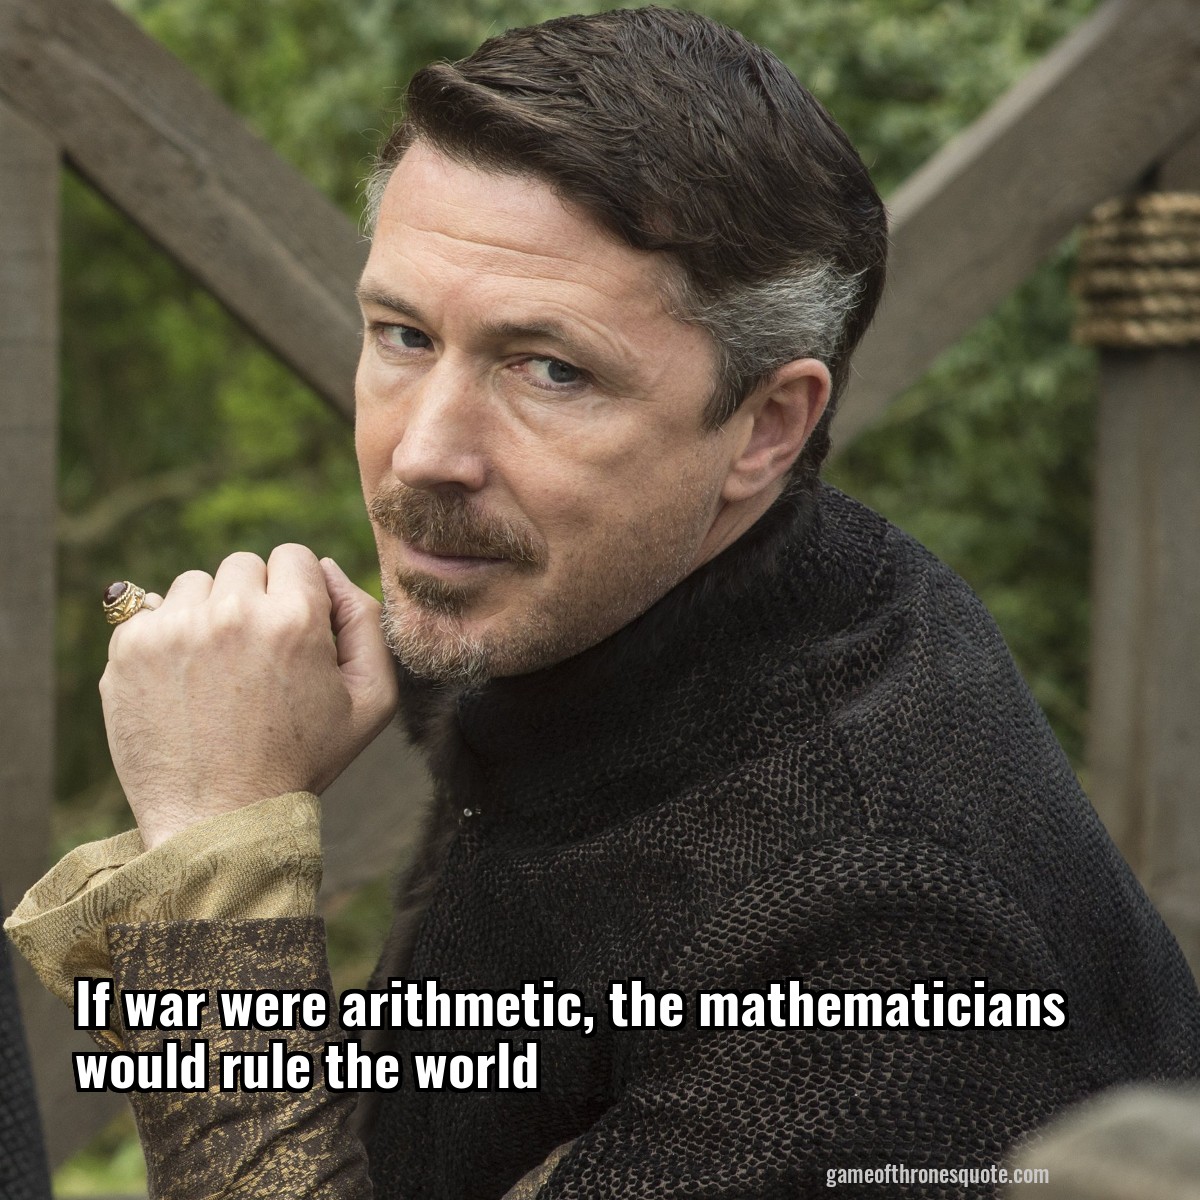 If war were arithmetic, the mathematicians would rule the world